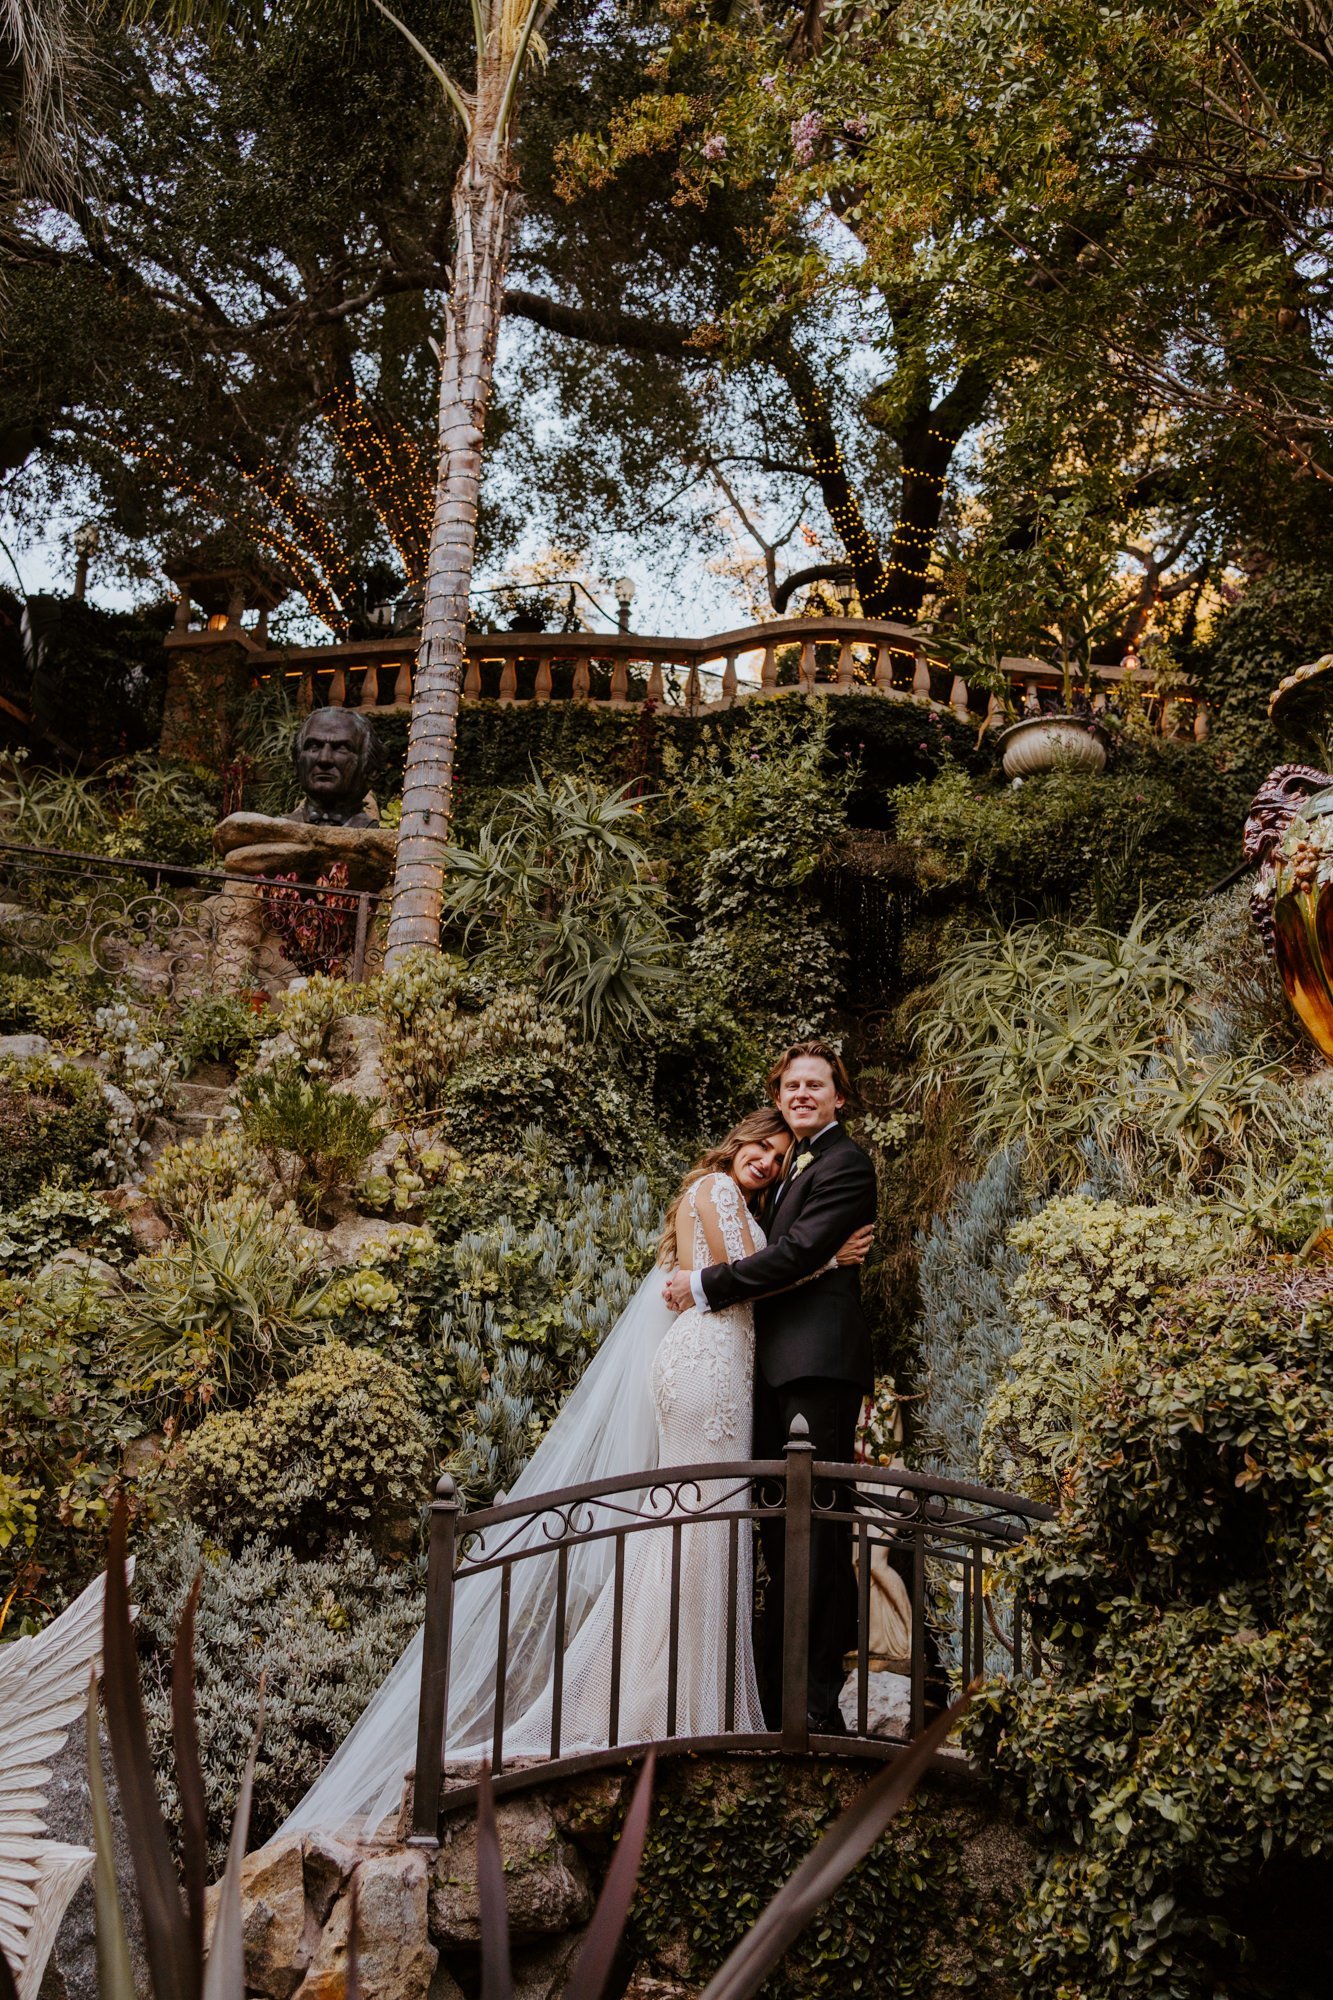 Romantic wedding portrait, bride and groom on bridge at The Houdini Estate in Los Angeles, wedding photography by Tida Svy